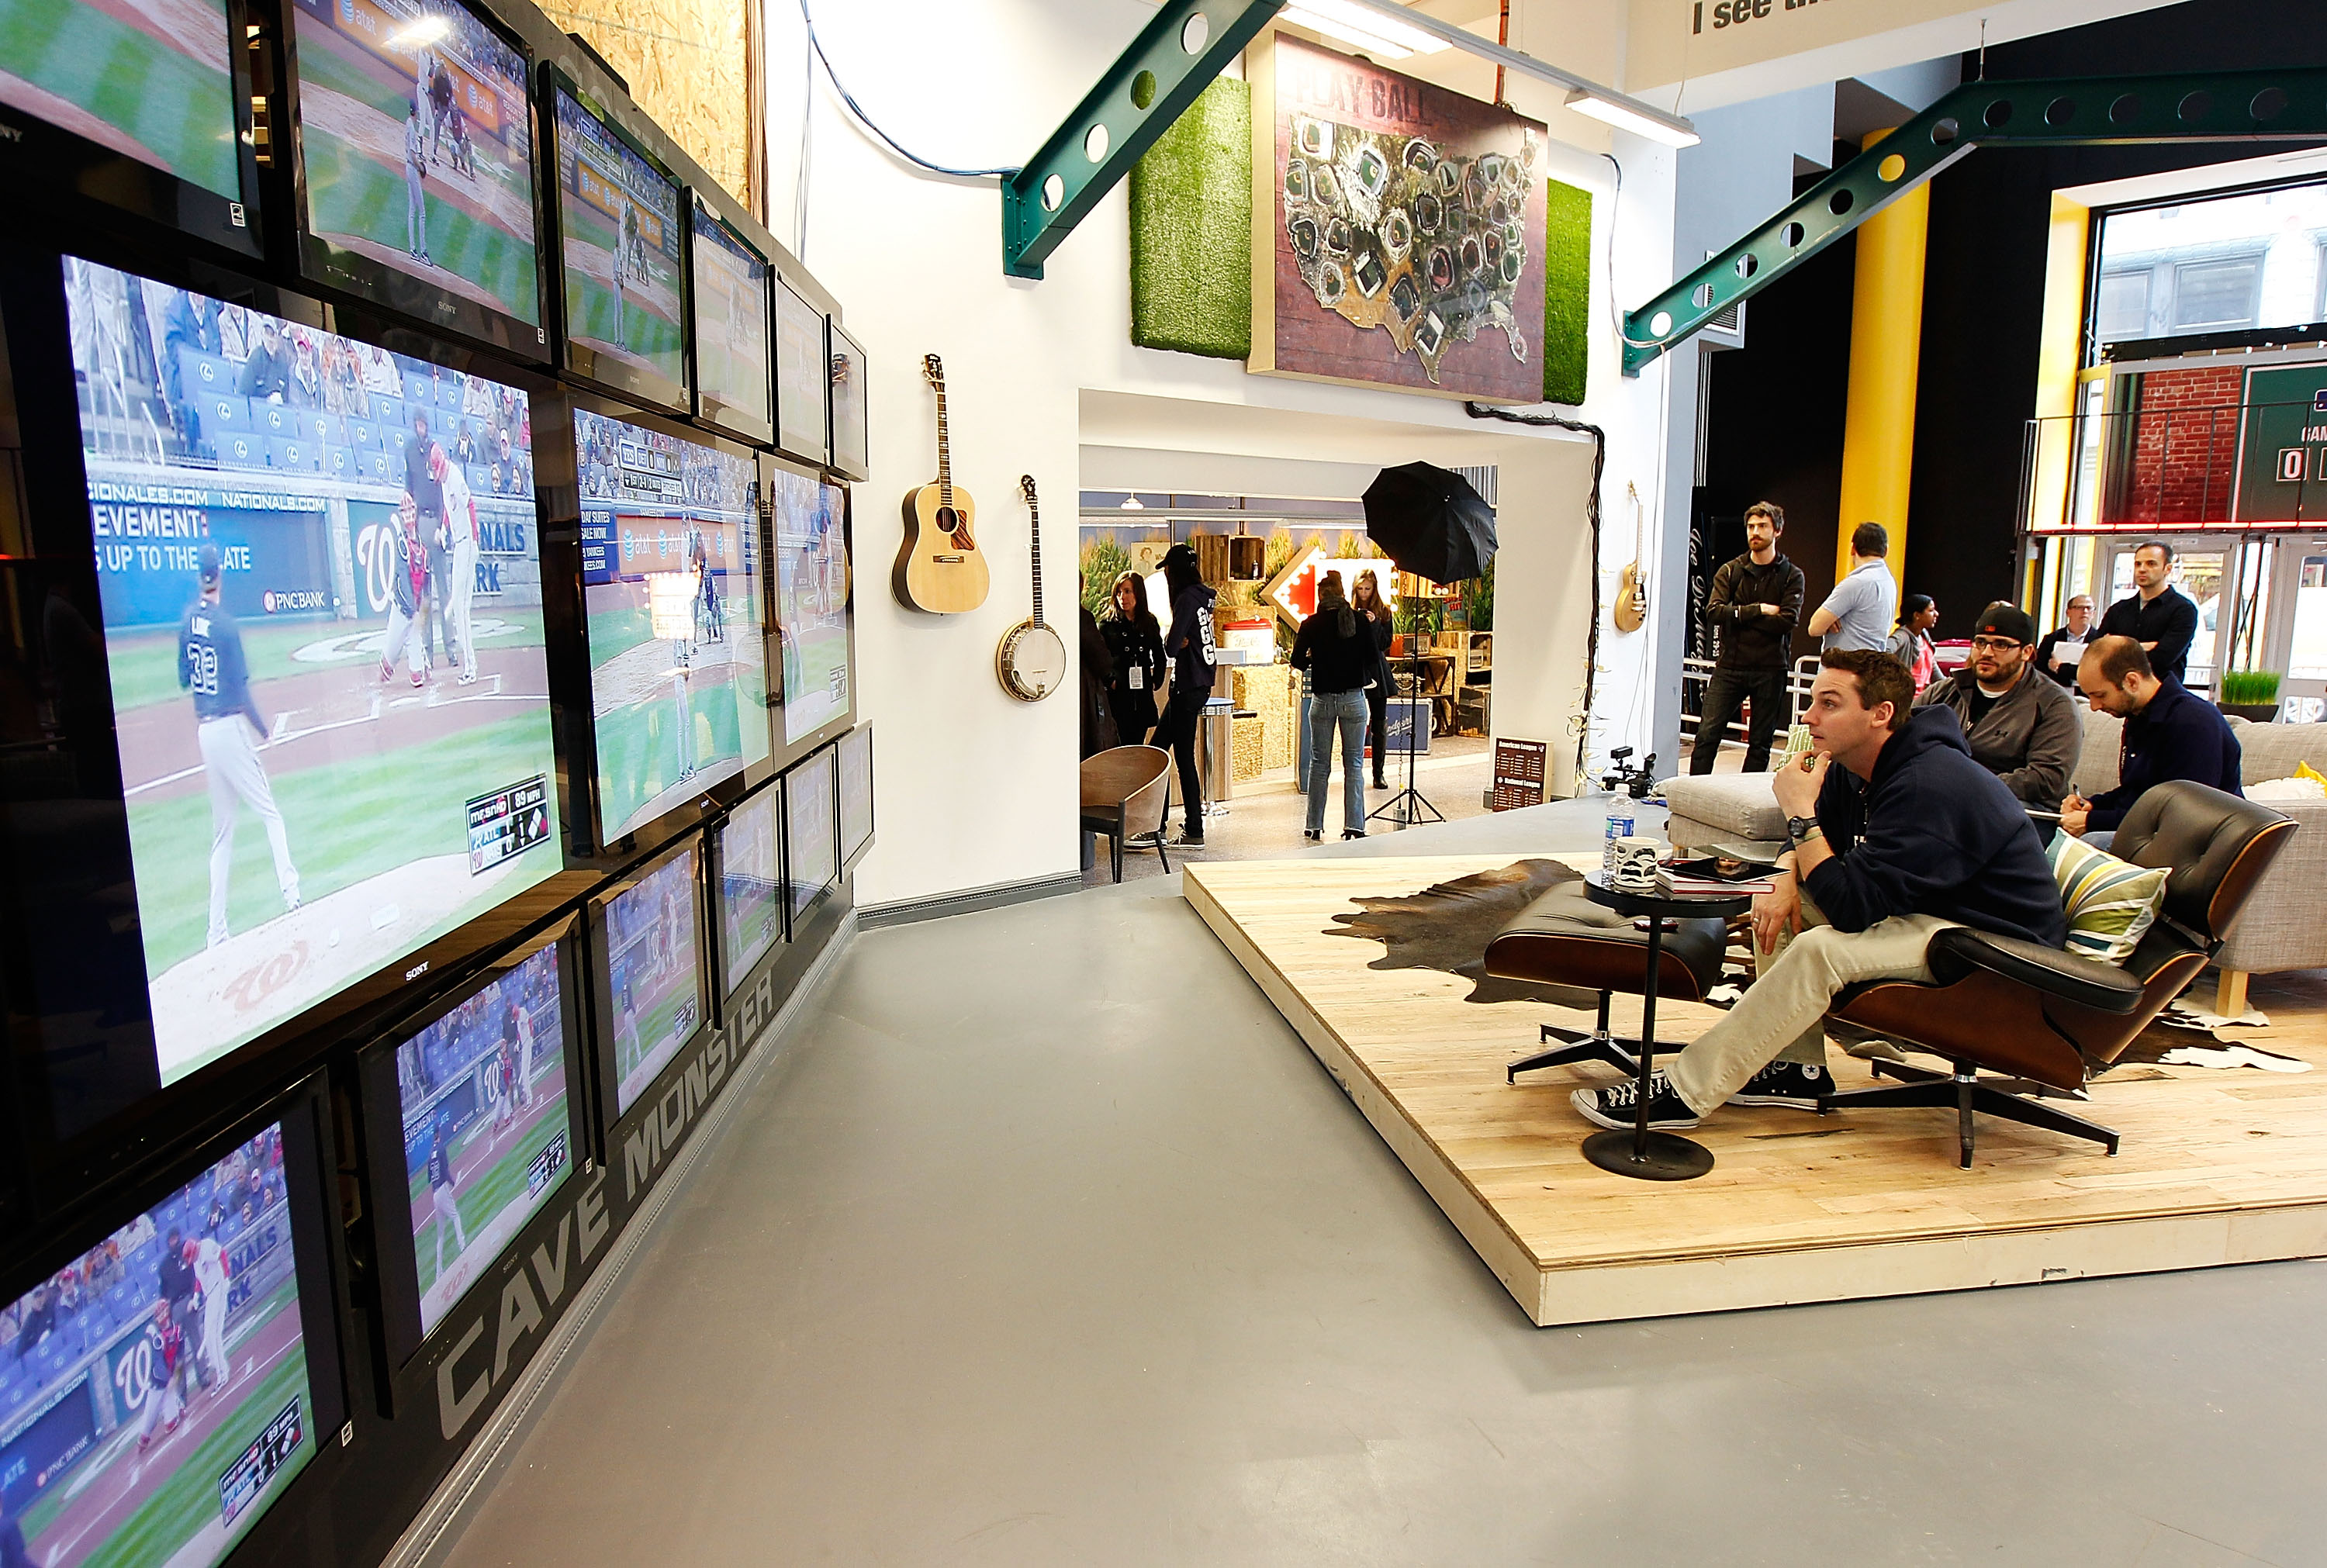 NEW YORK, NY - MARCH 31:  A general view of MLB's Fan Cave where Mike O'Hara and Ryan Wagner (not shown), the 'winners' of Major League Baseball's 'Dream Job', will watch at least 2,454 MLB games of the 2011 season from inside a transparent room on March